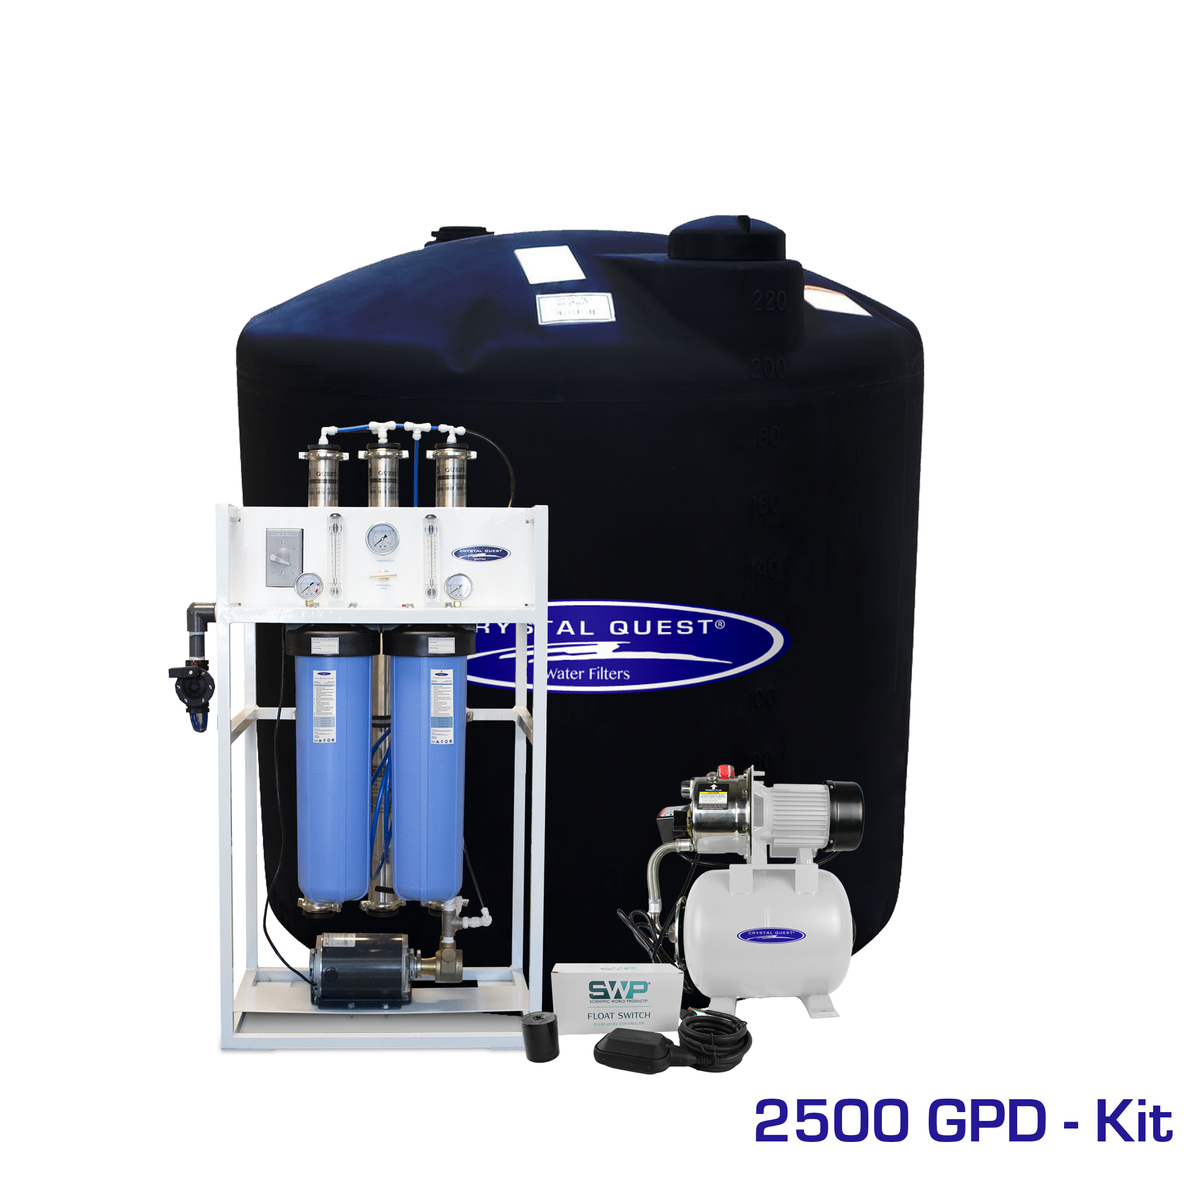 1,500 GPD / Add Storage Tank Kit (550 Gal) Commercial Mid-Flow Reverse Osmosis System (500-7000 GPD) - Commercial - Crystal Quest